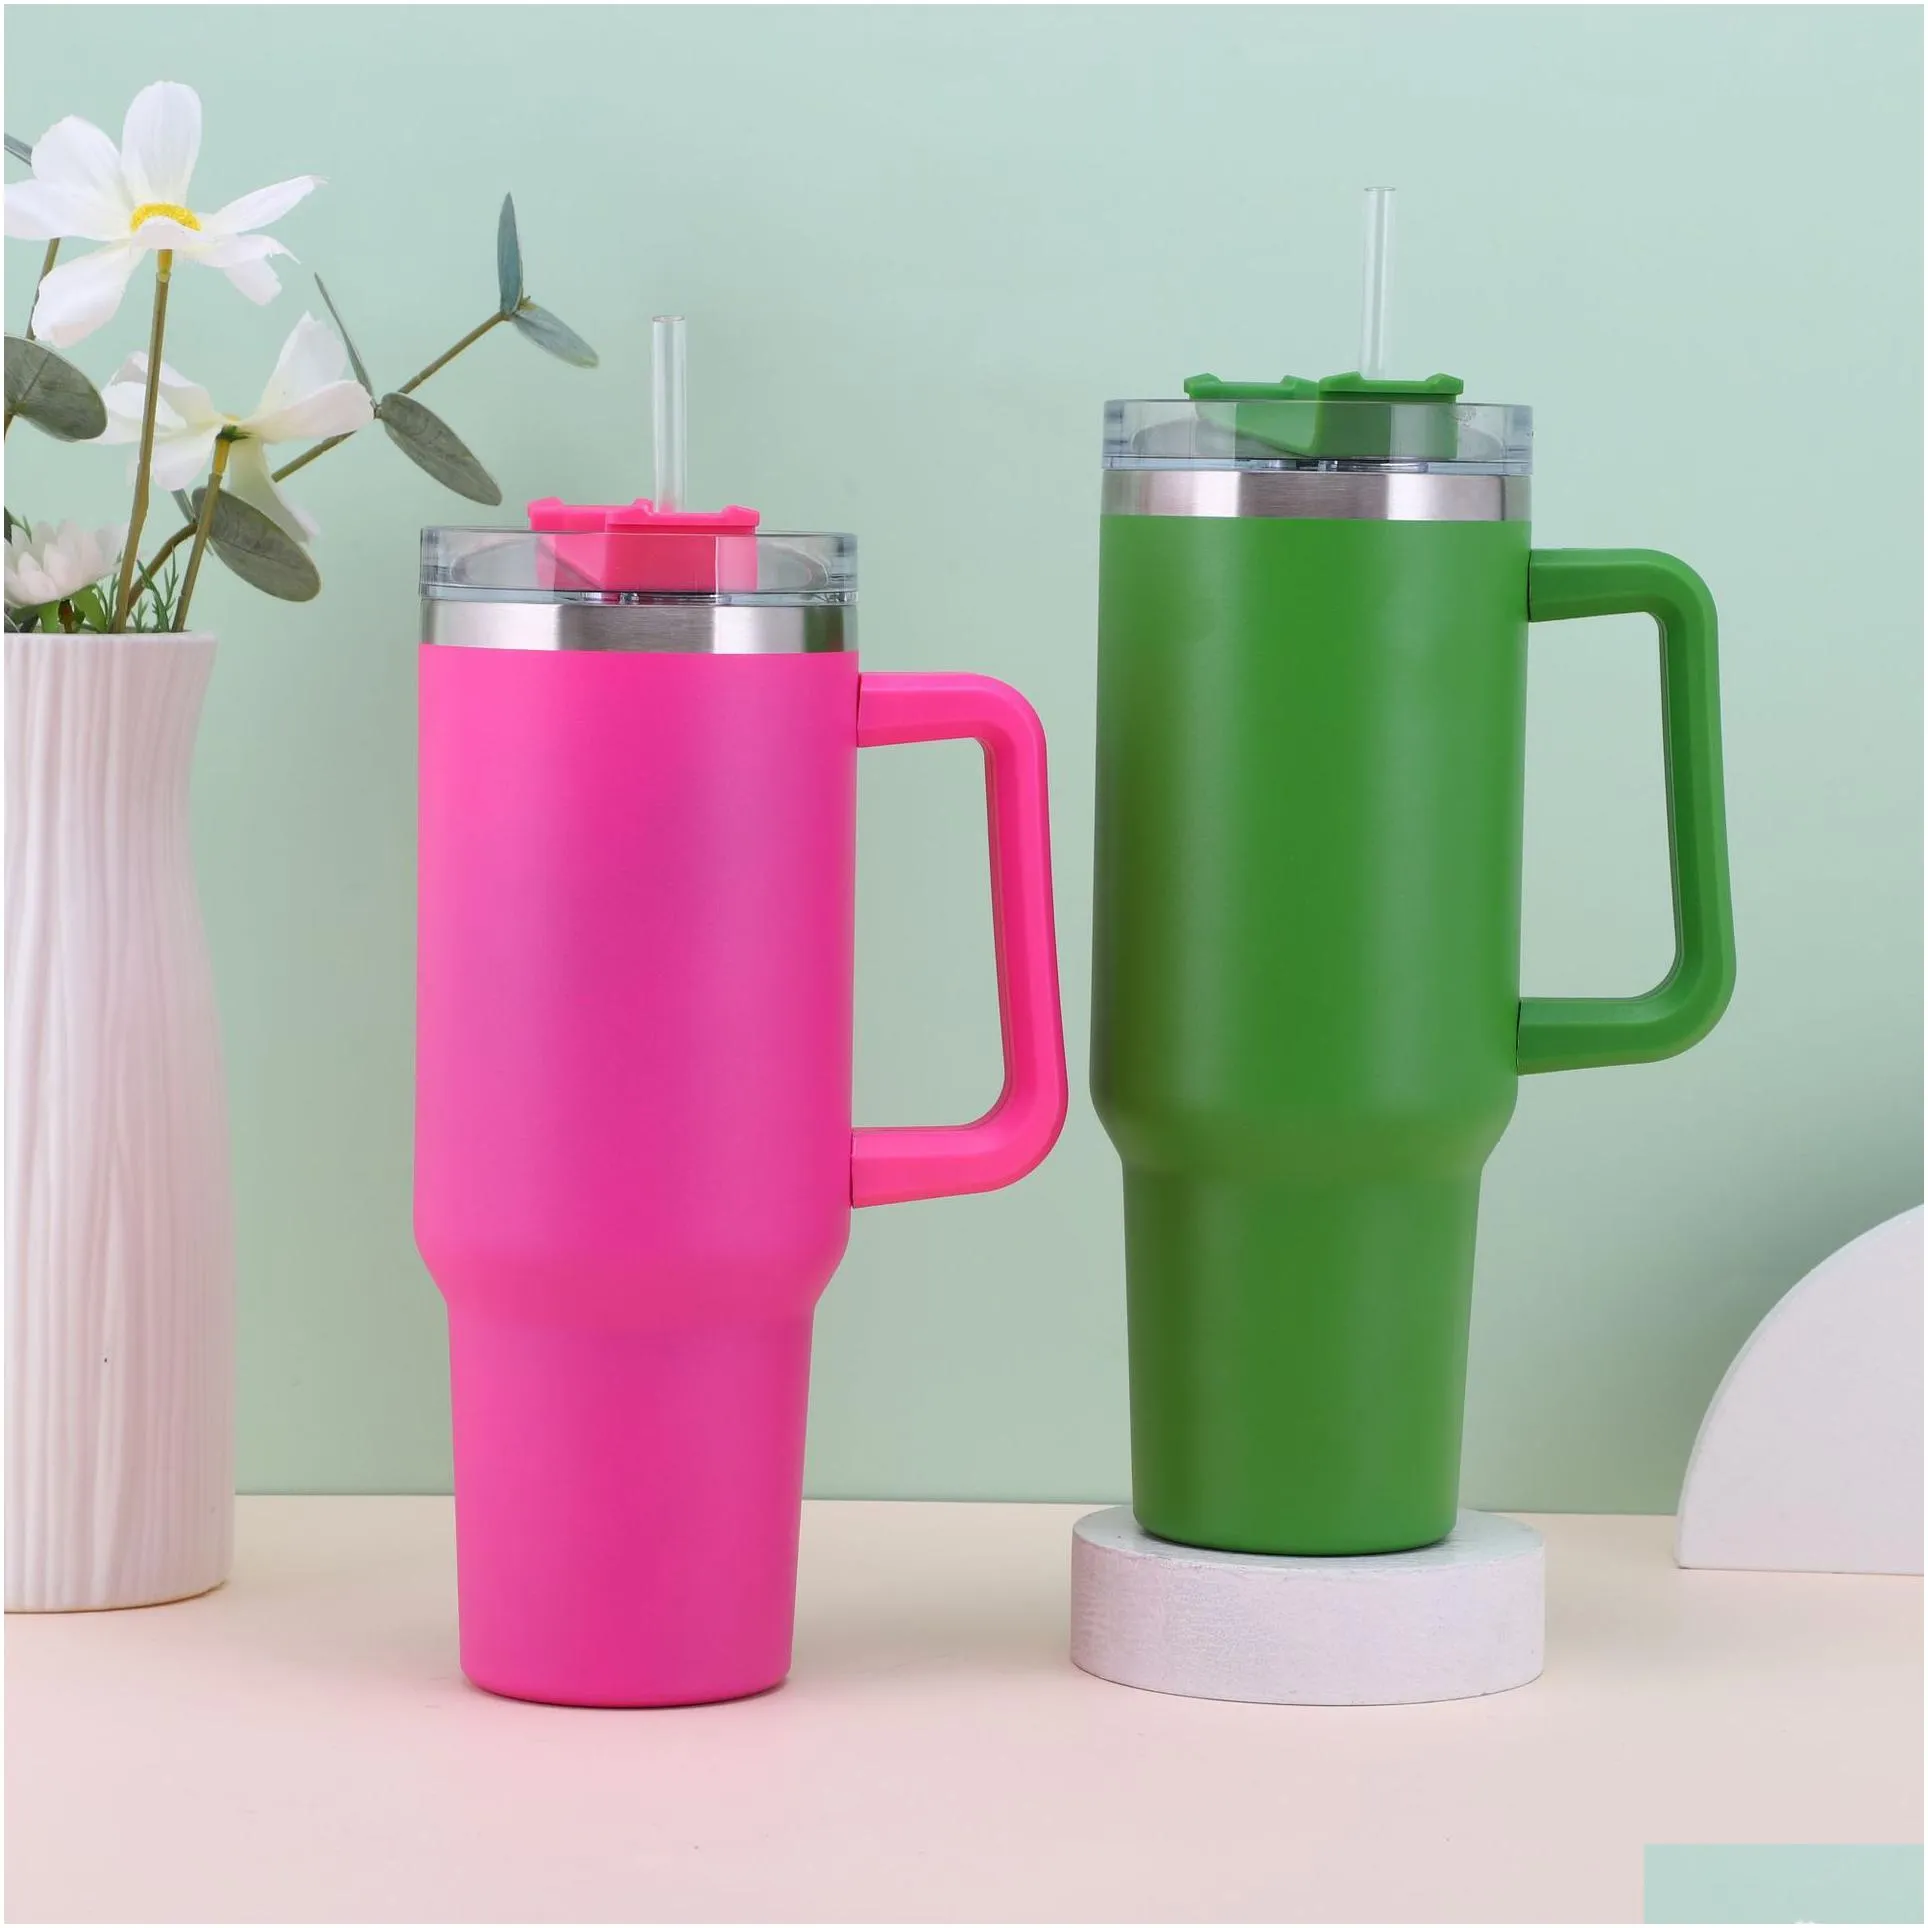 40oz reusable mug tumbler with handle and big capacity straw stainless steel insulated travel mugs tumblers keep drinks cold